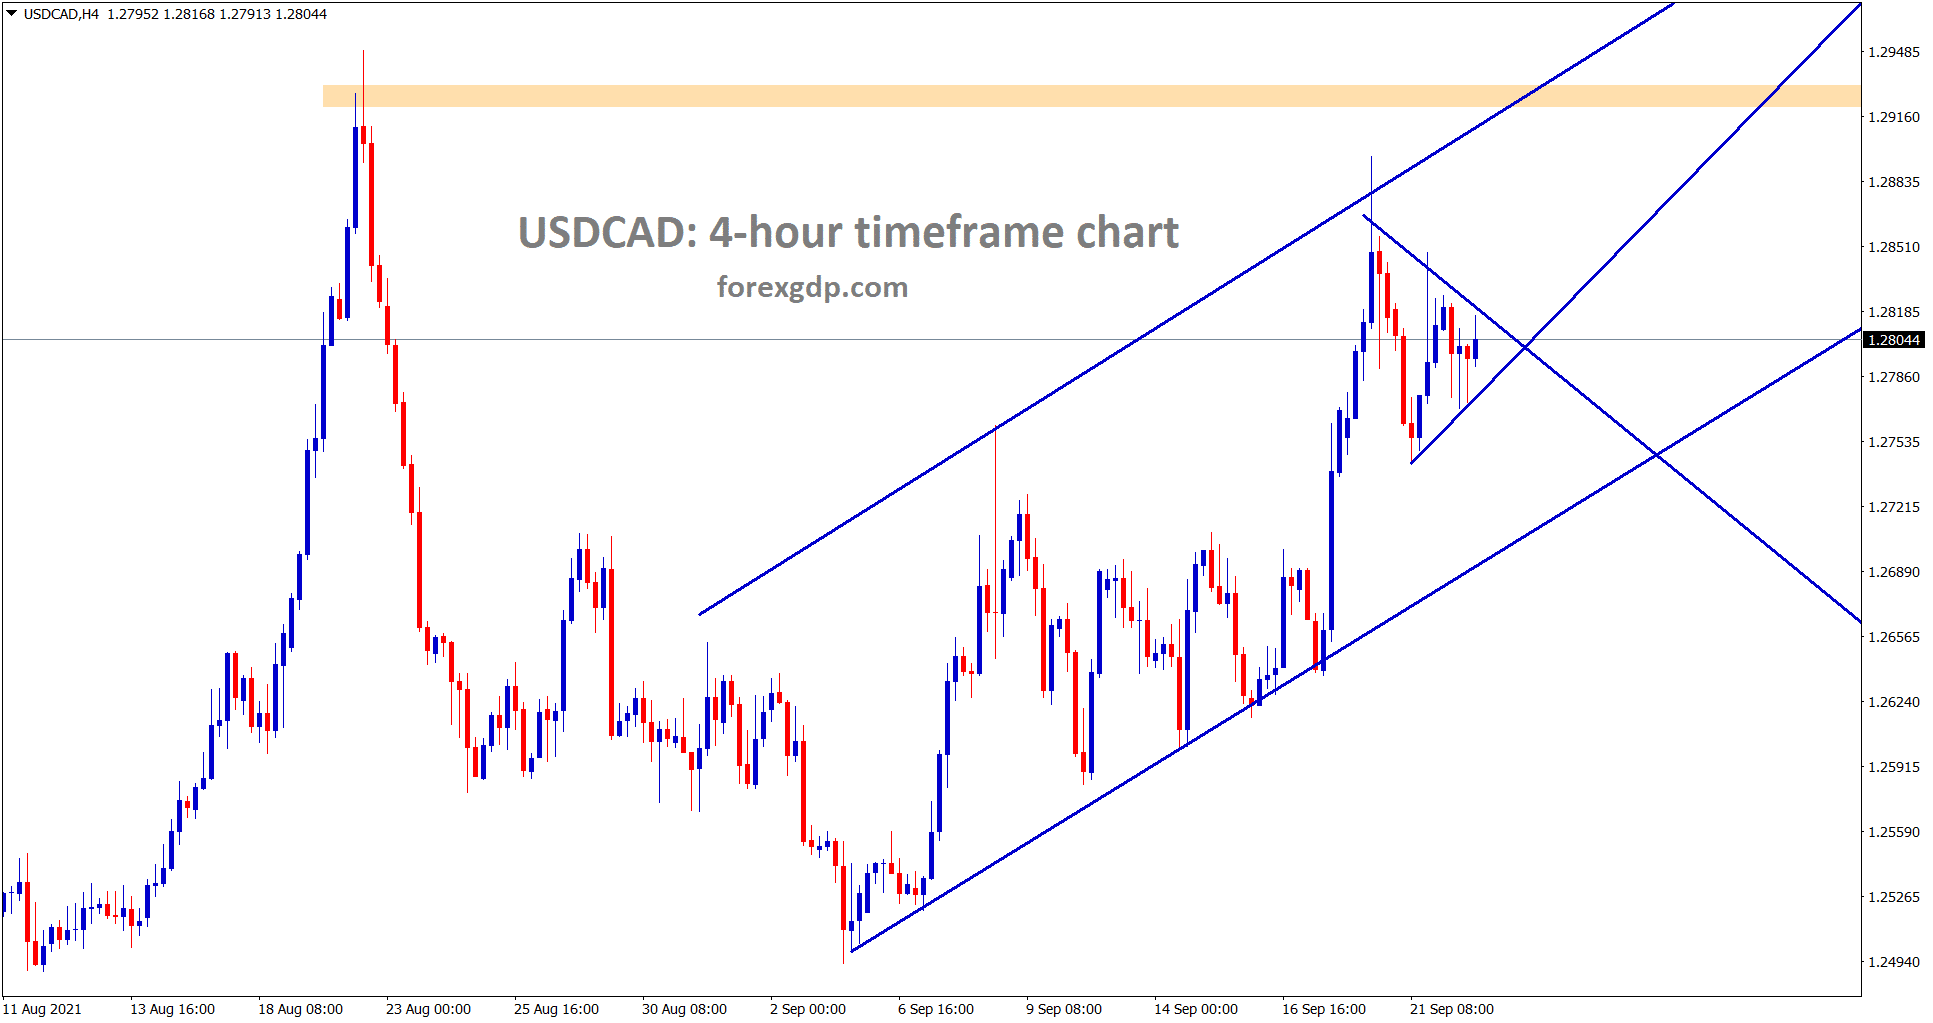 USDCAD is moving in an uptrend and recently formed a small symmetrical triangle wait for breakout